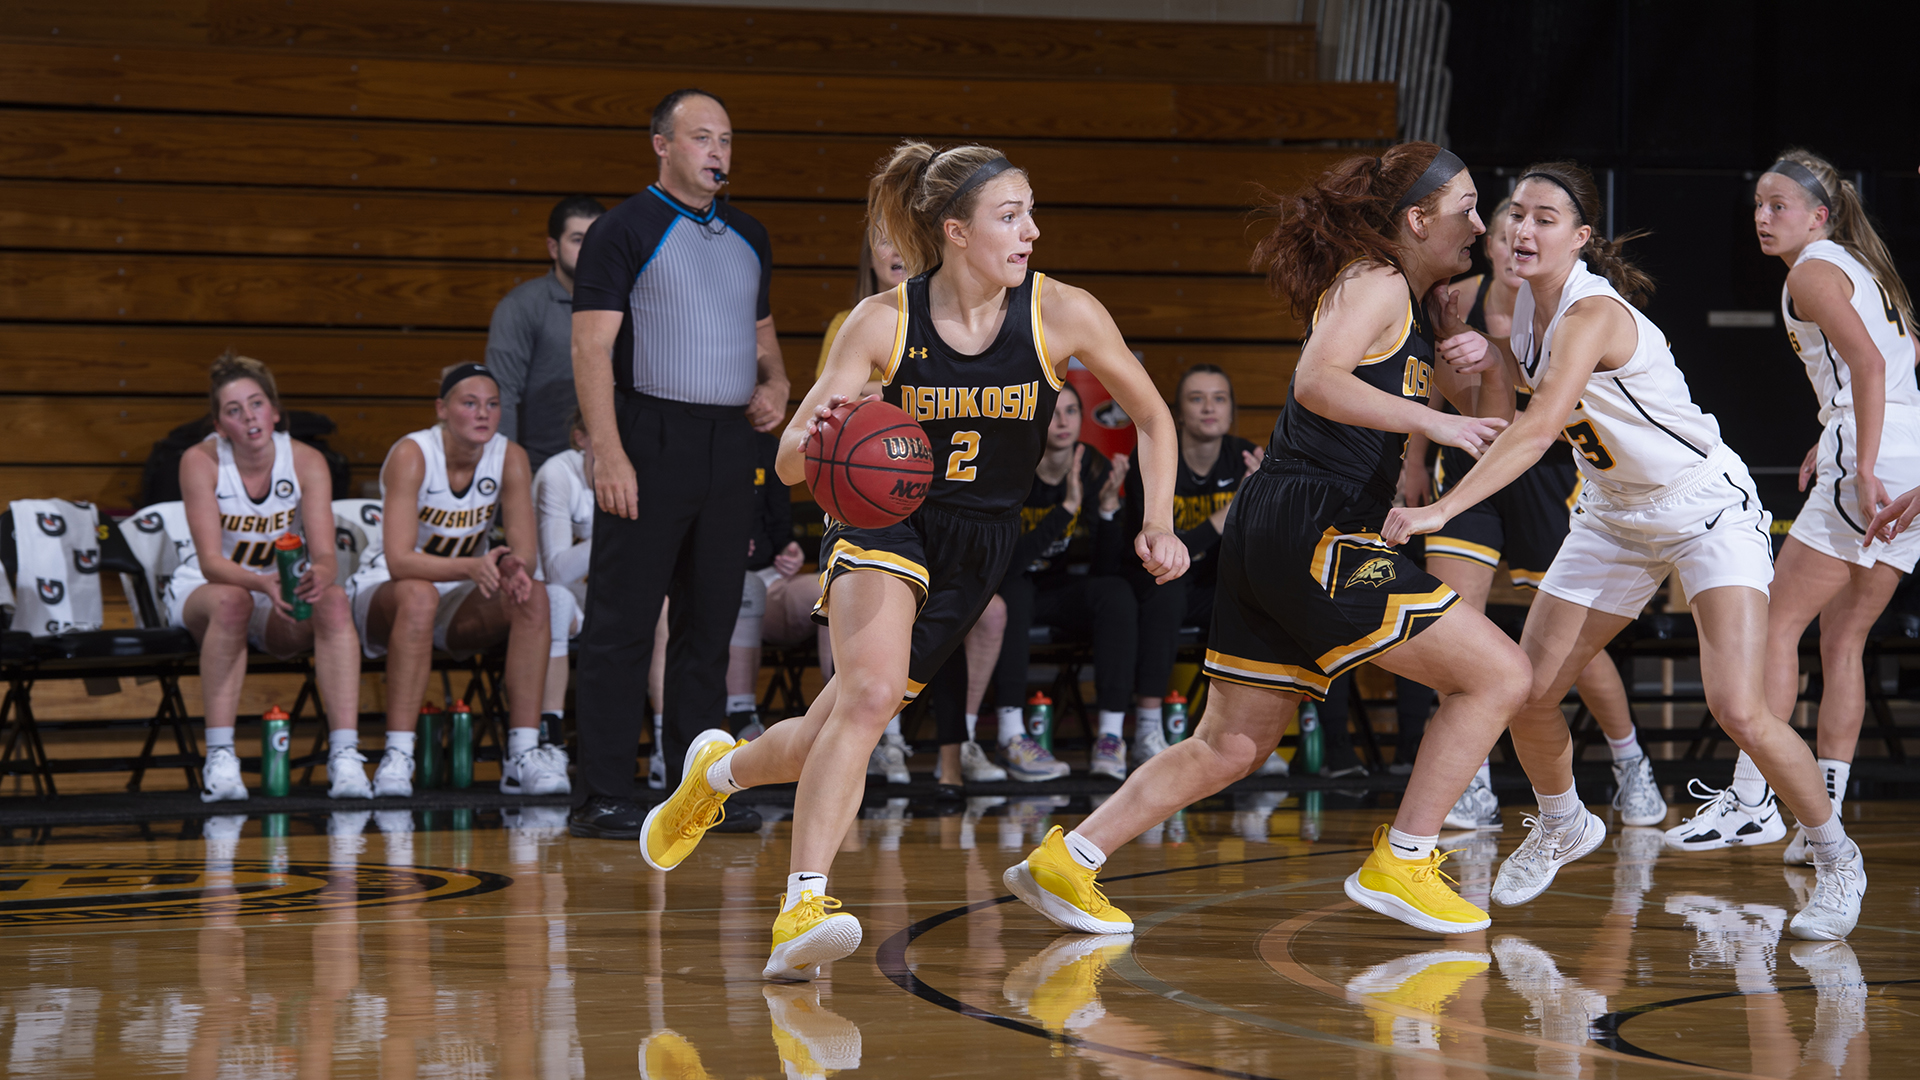 Abby Kaiser had three rebounds and a pair of steals against the Division II Huskies.